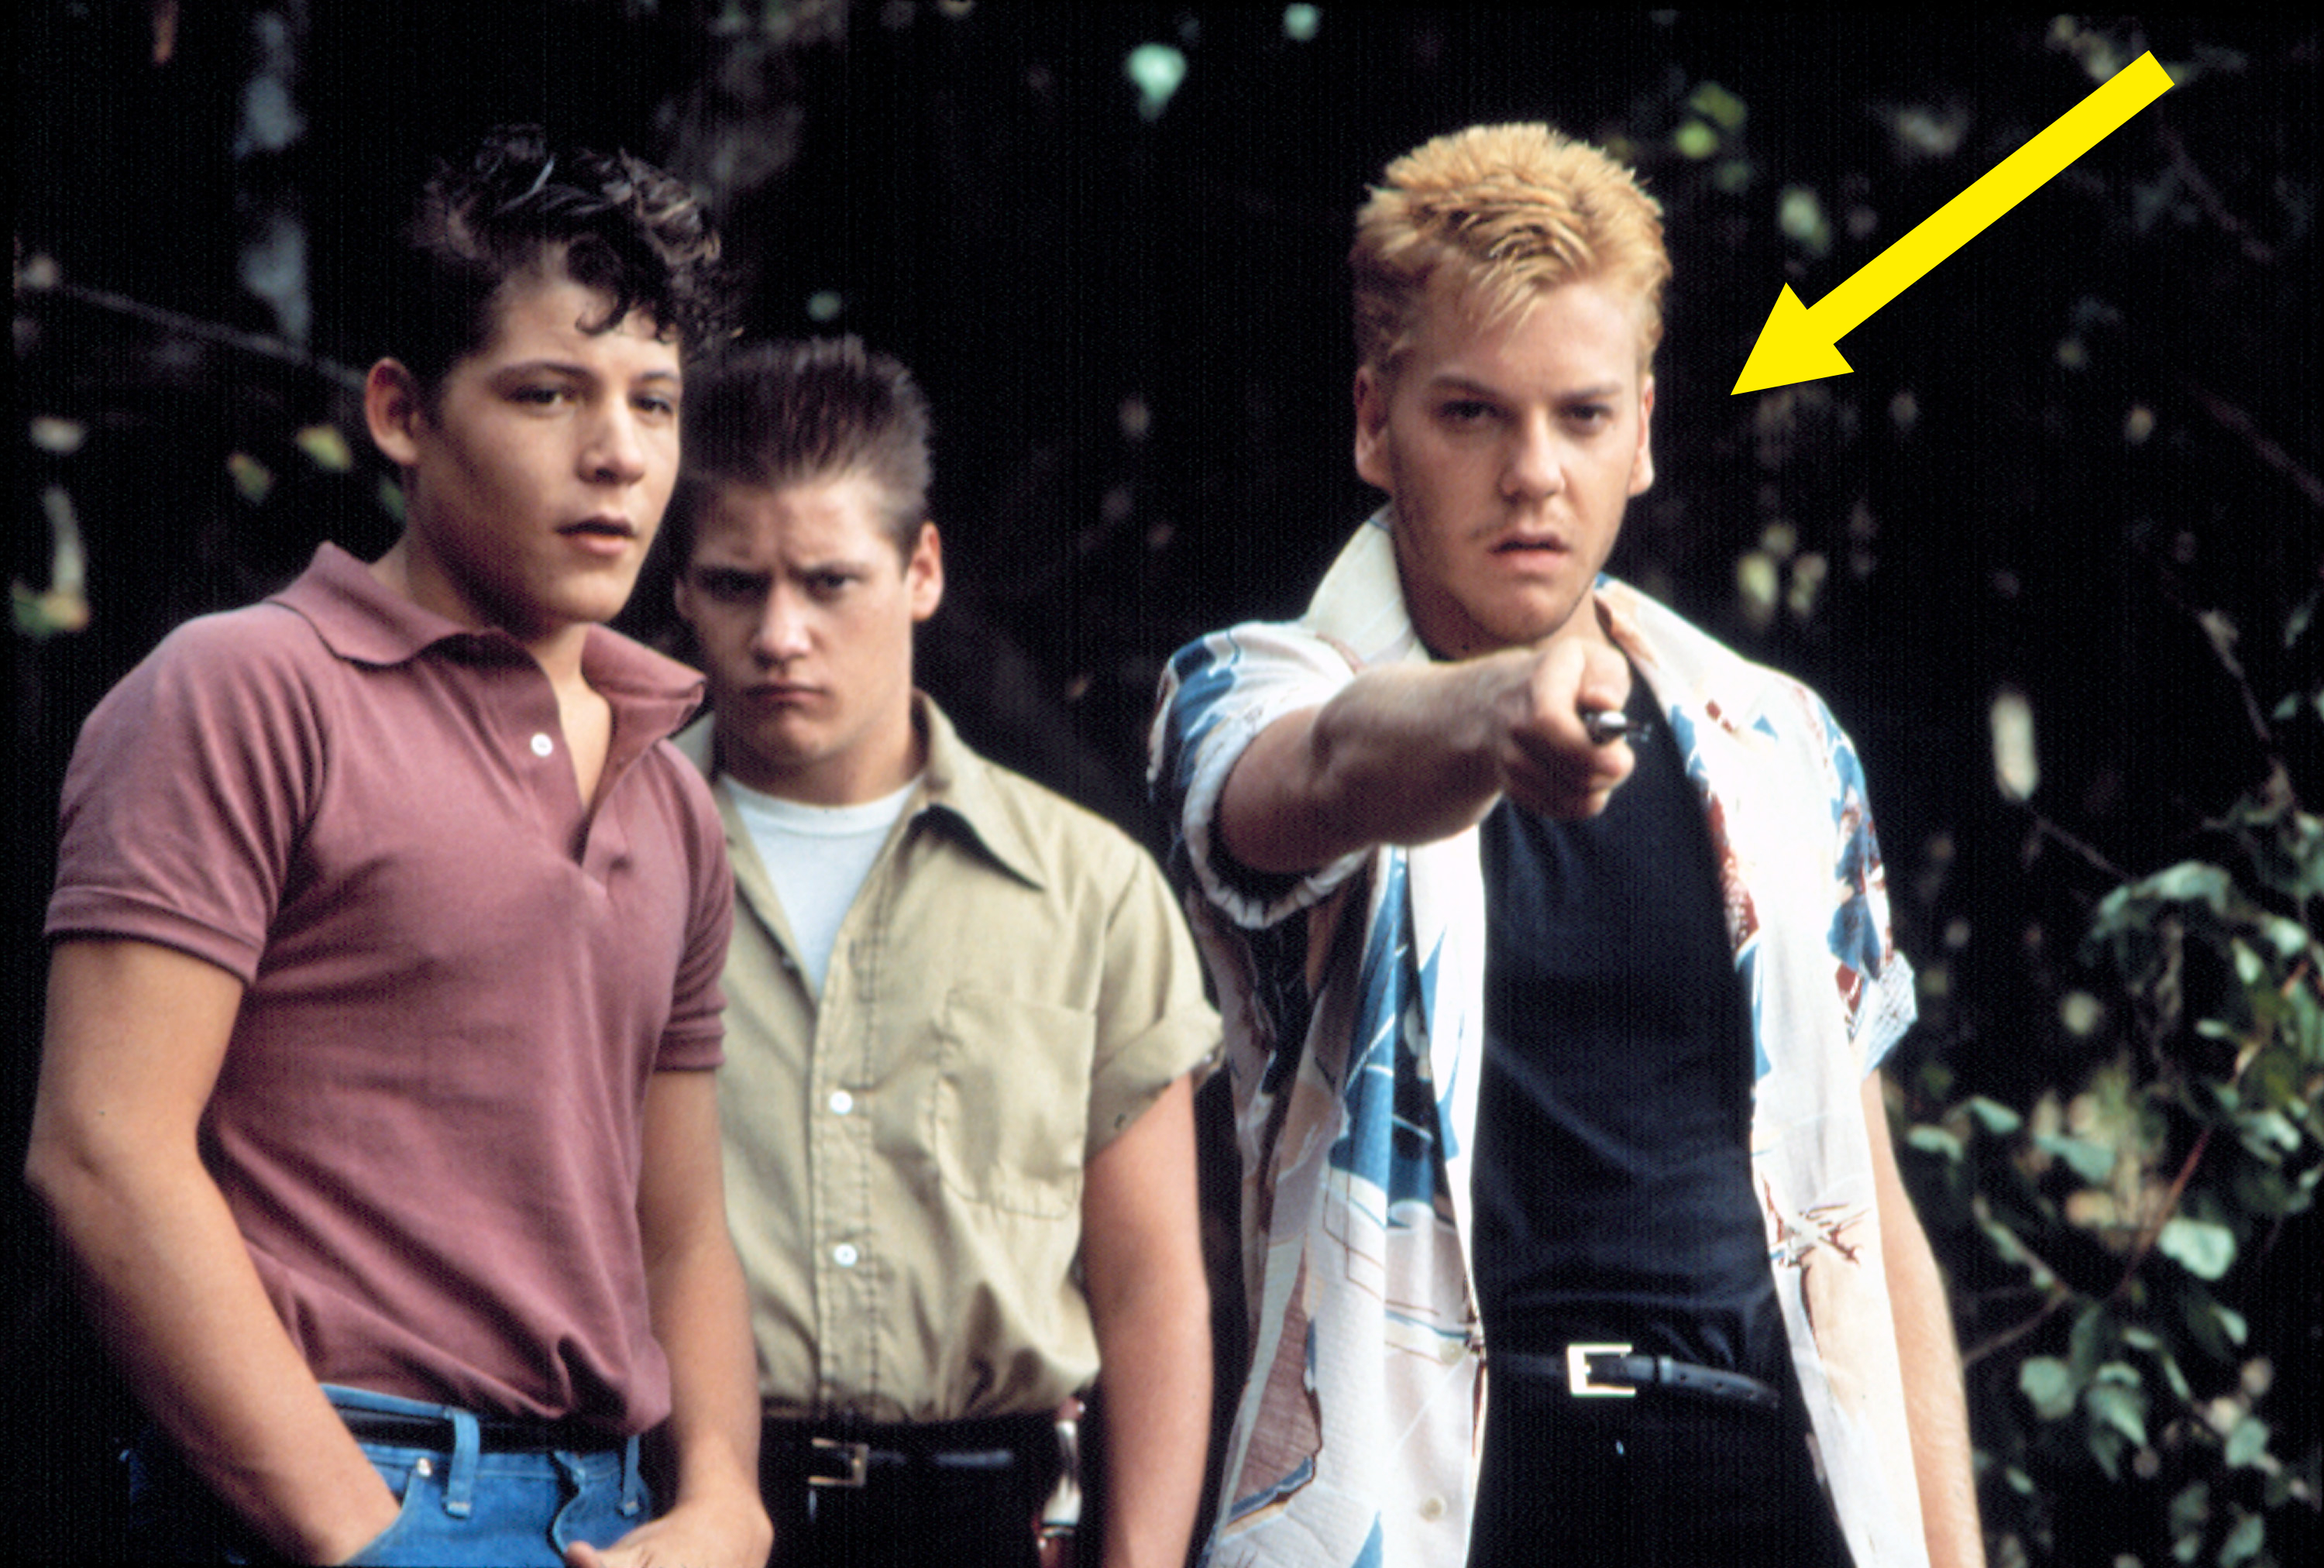 Kiefer with spiked hair in a scene from &quot;The Outsiders&quot;